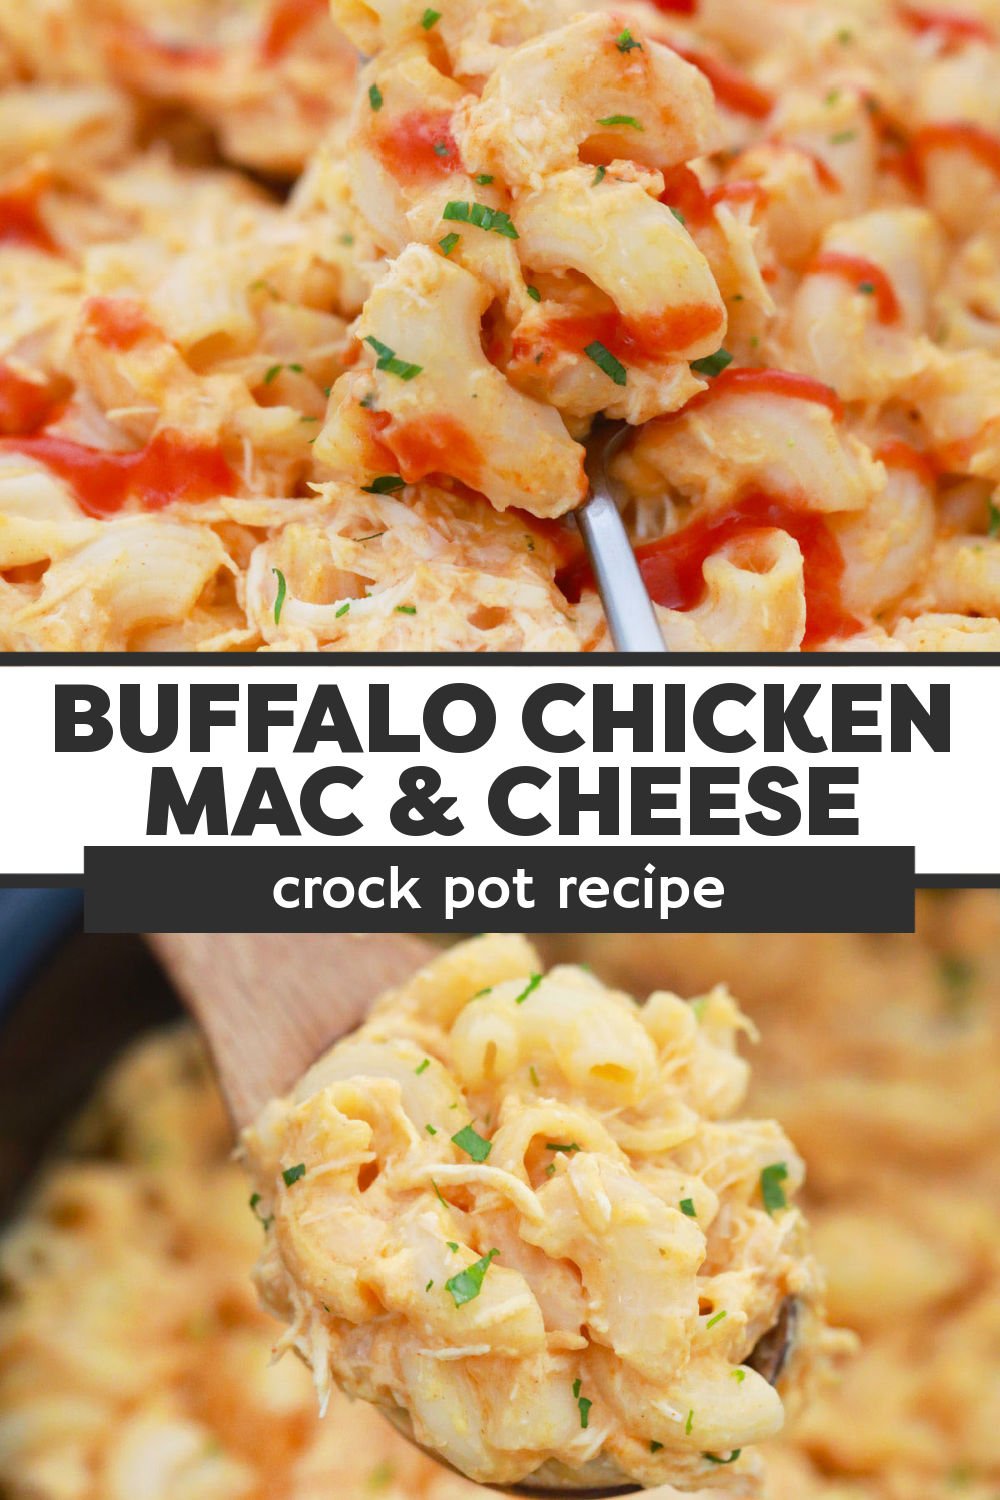 Slow cooker Buffalo Chicken Mac & Cheese is the perfect comfort food made easy in the crock pot. With tender shredded chicken breasts, homemade cheese sauce, and tangy buffalo wing sauce, this is the best buffalo mac you will ever have.  | www.persnicketyplates.com